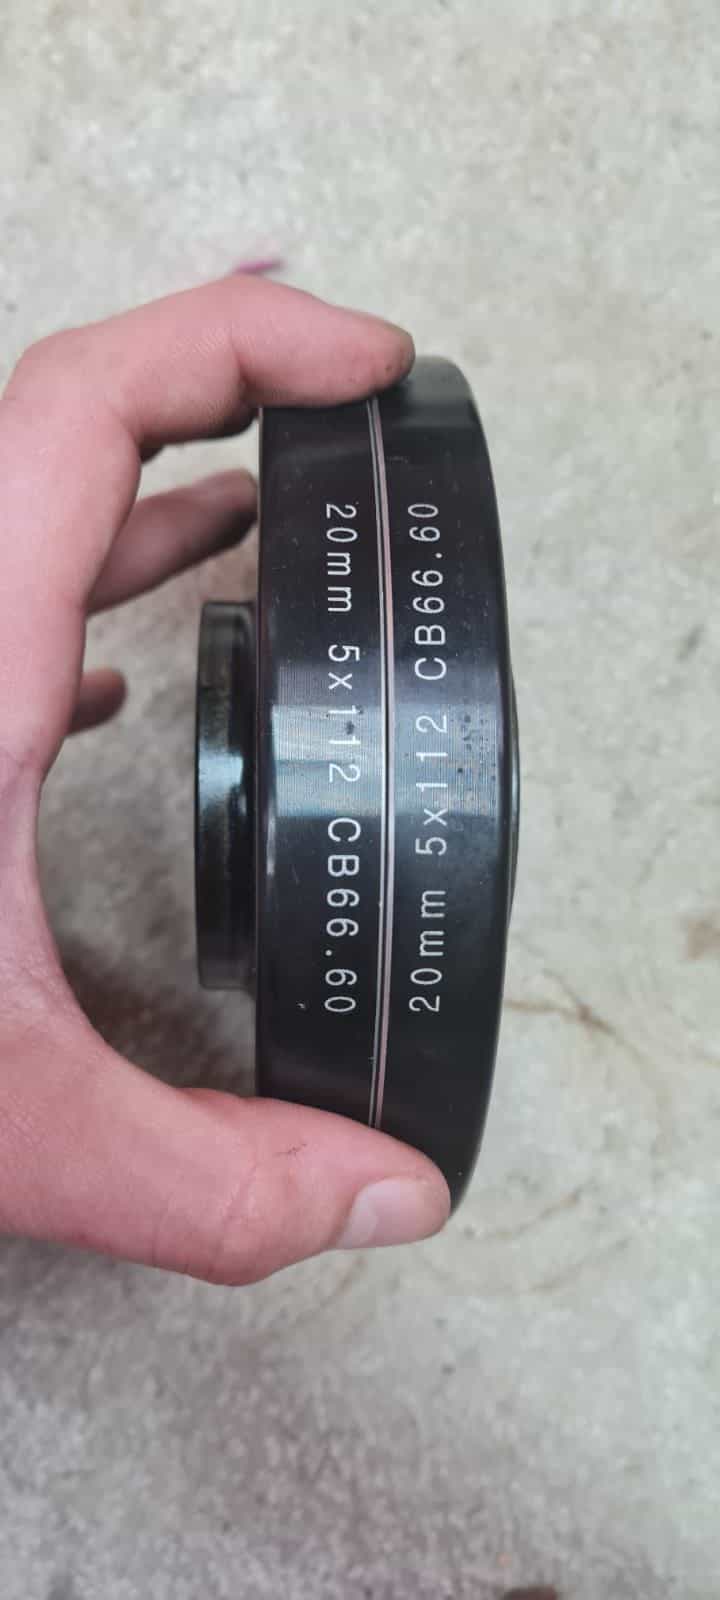 2019 Mercedes-Benz C63 AMG S - 15mm spacers (hub centric) - Wheels and Tires/Axles - $30 - Leicestershire LE98GR, United Kingdom